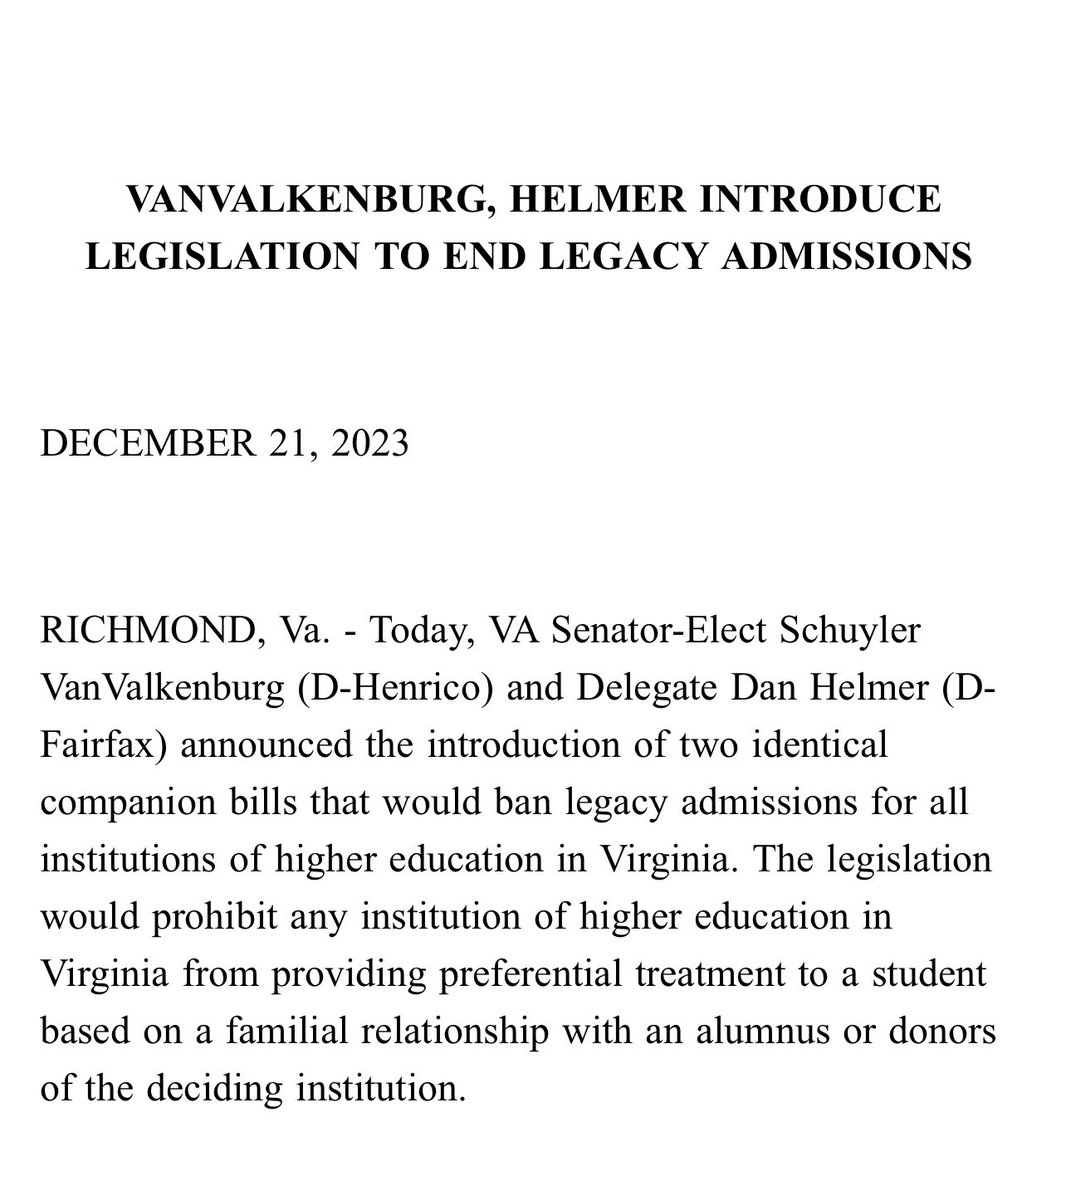 Today @HelmerVA and I introduced a bill to ban legacy admissions in Virginia colleges and universities. This will promote more fairness in Virginia universities and promote merit and upward mobility!